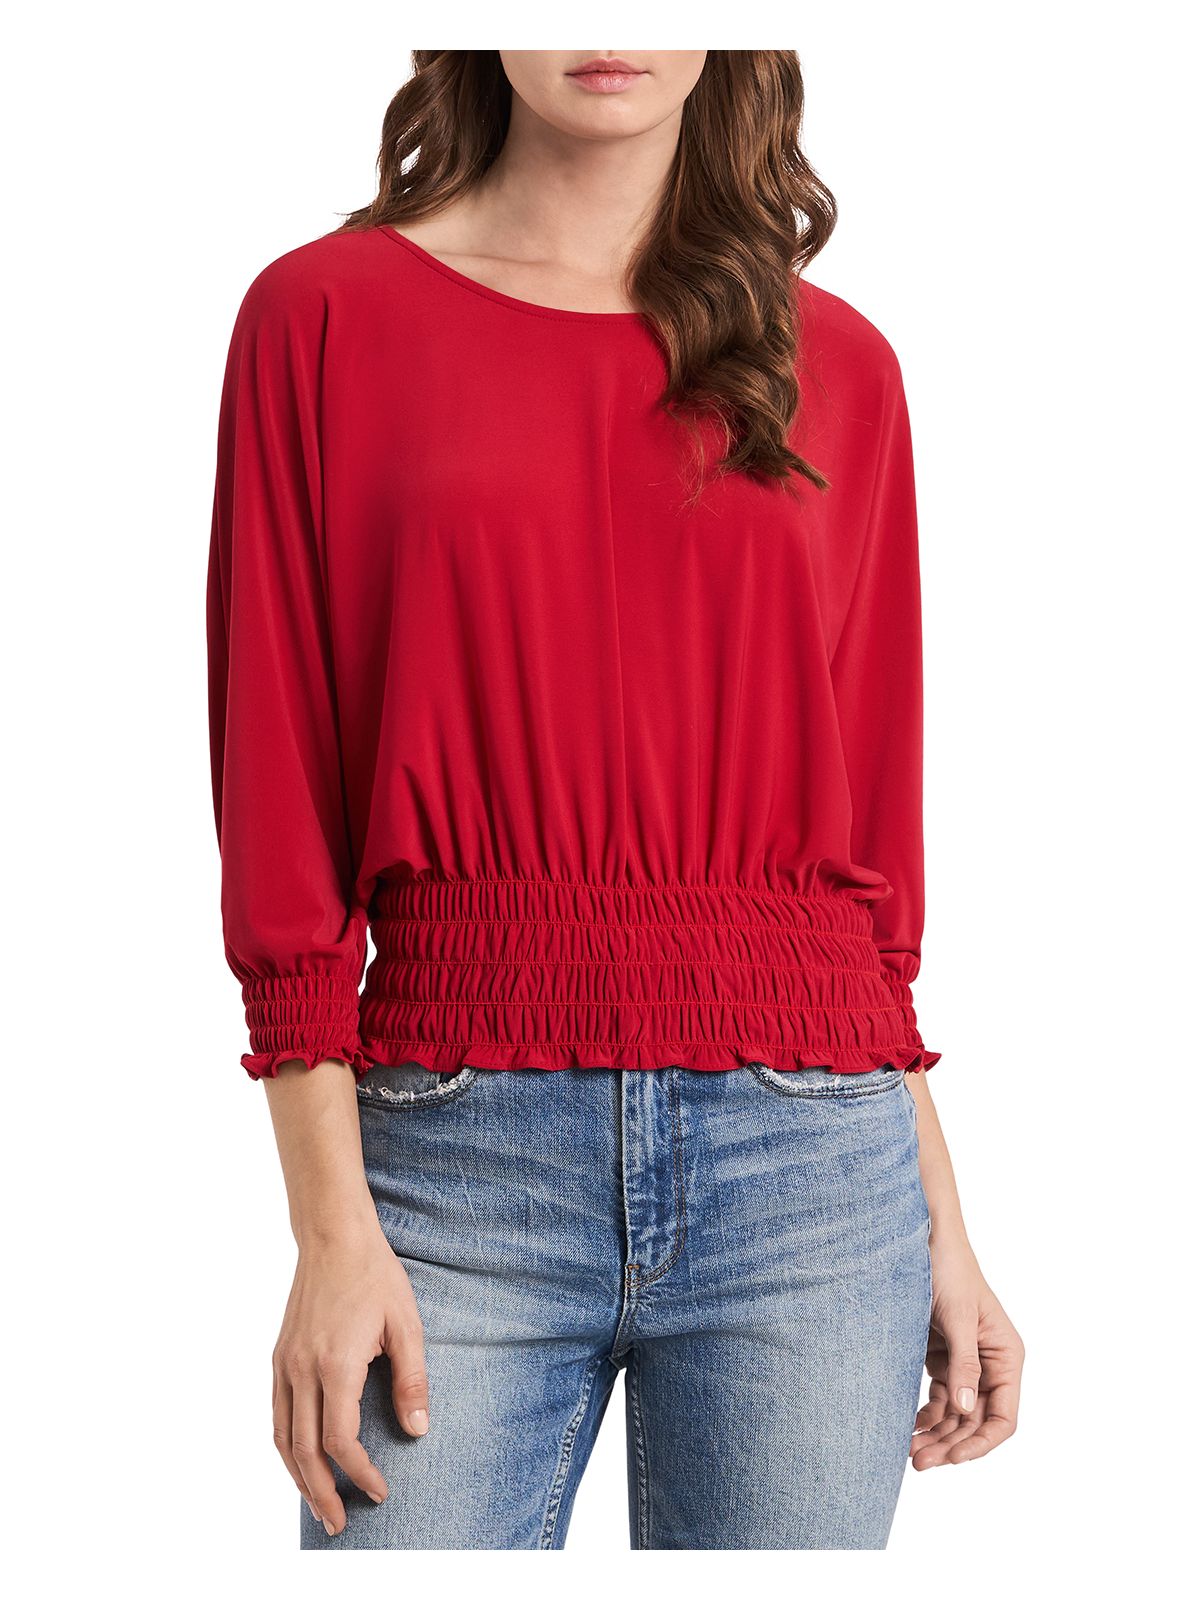 VINCE CAMUTO Womens Red Dolman Sleeve Round Neck Top M